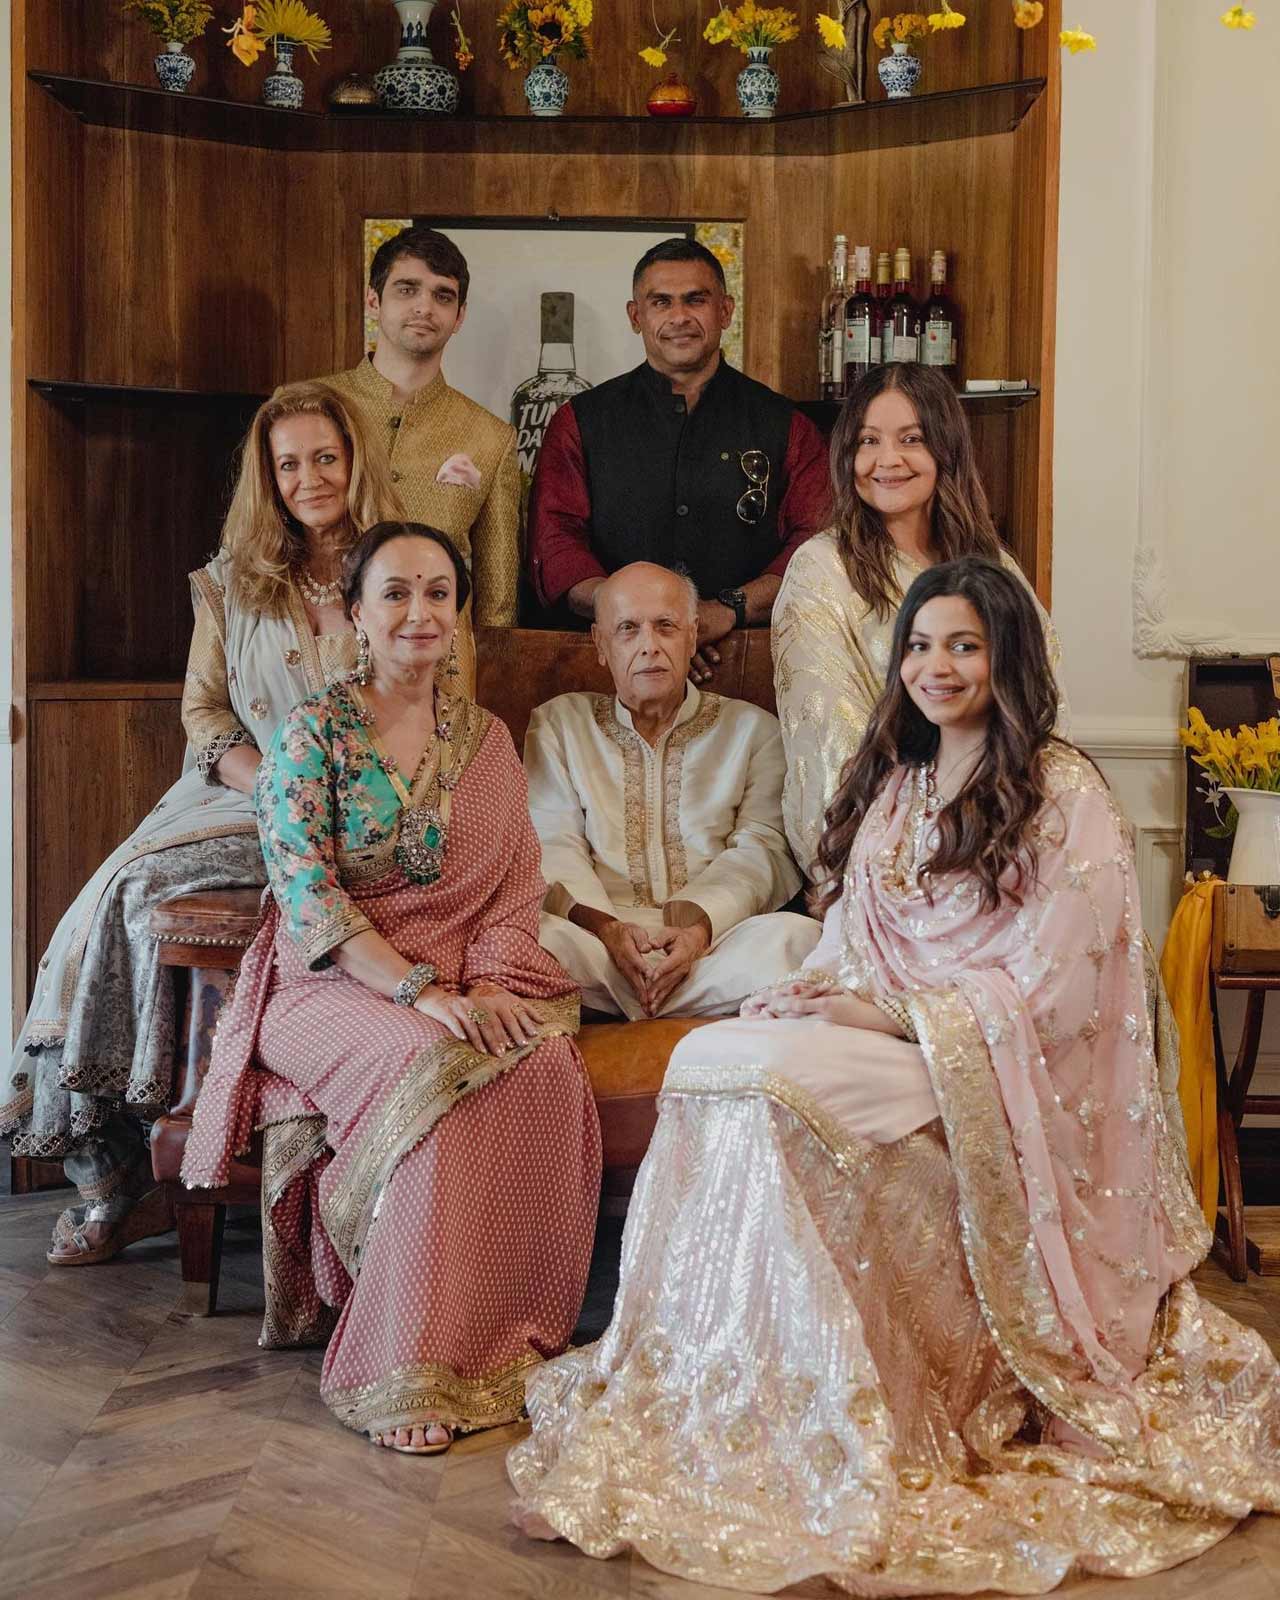 From the groom's side, mother Neetu Kapoor, sister Riddhima Kapoor Sahni and cousin Karisma Kapoor performed the rituals, as Ranbir's other cousin, Kareena Kapoor Khan, stood by the newly-wed couple's side.